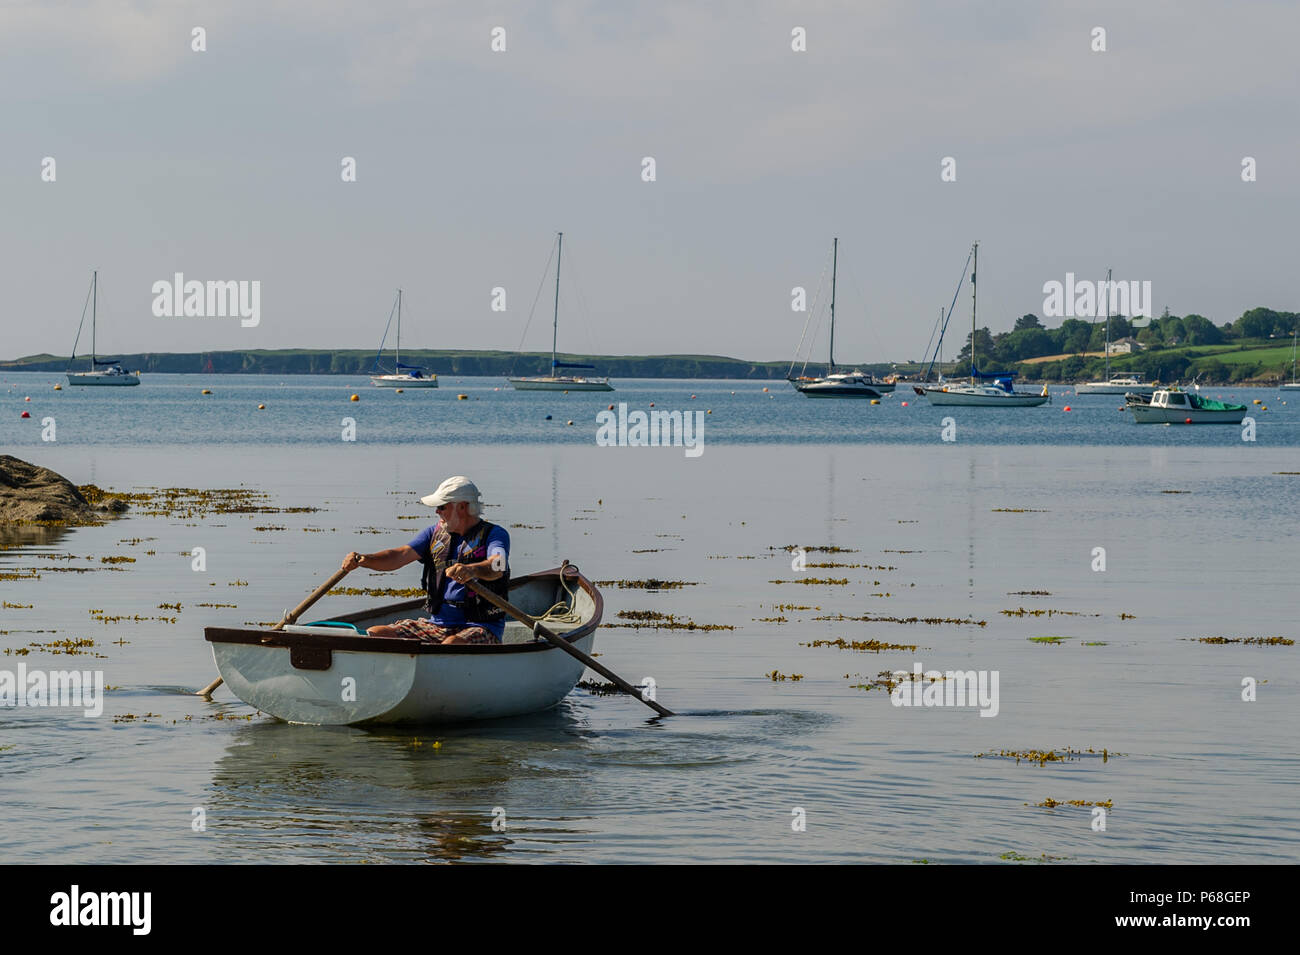 Schull, West Cork, Ireland. 29th June, 2018. A local Schull resident rows out into the bay in his boat for a day's fishing during the heatwave. Temperatures will remain in the mid 20's Celsius for the rest of the weekend but rain is forecast from Monday onwards. Credit: Andy Gibson/Alamy Live News. Stock Photo